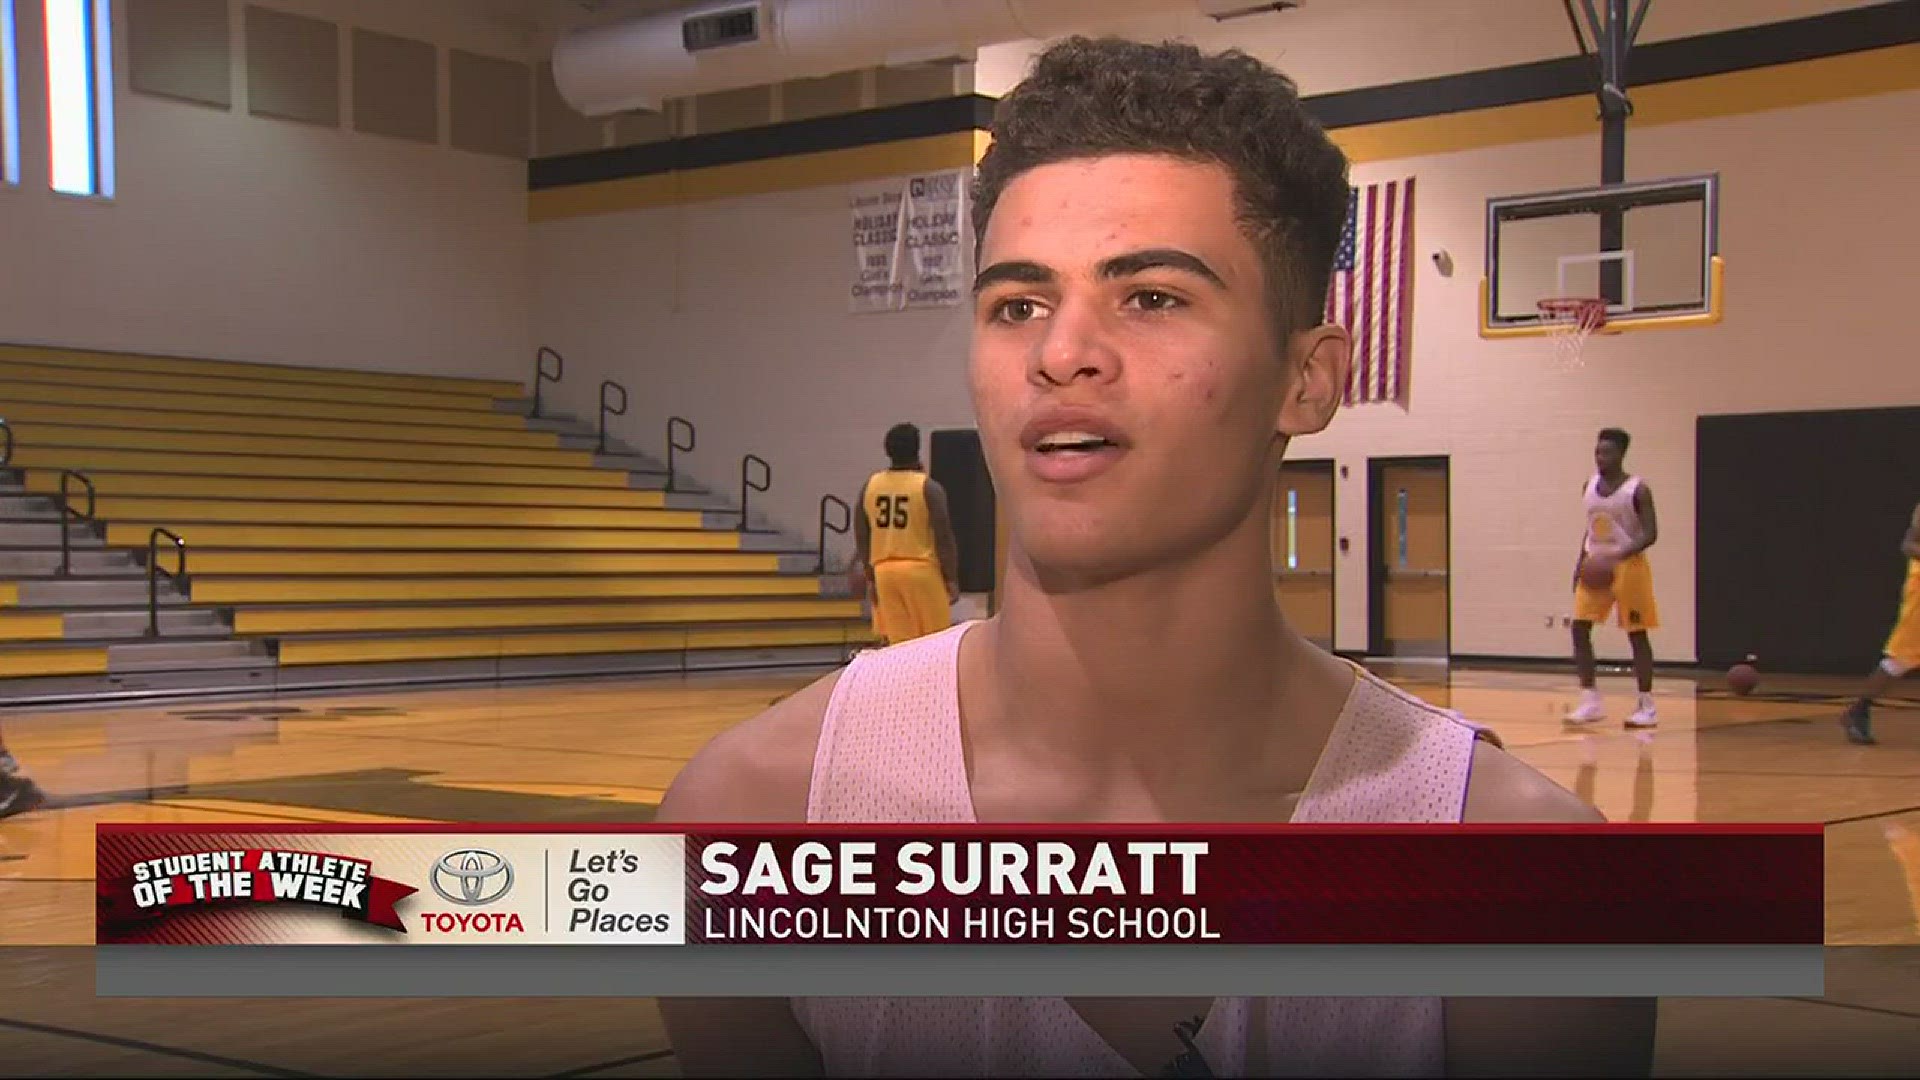 Our latest Student-Athlete of the Week is one of the best two-sport athletes in the state. Lincolnton High School's Sage Surratt will play college football next season, but right now, his main focus is on the hardwood.